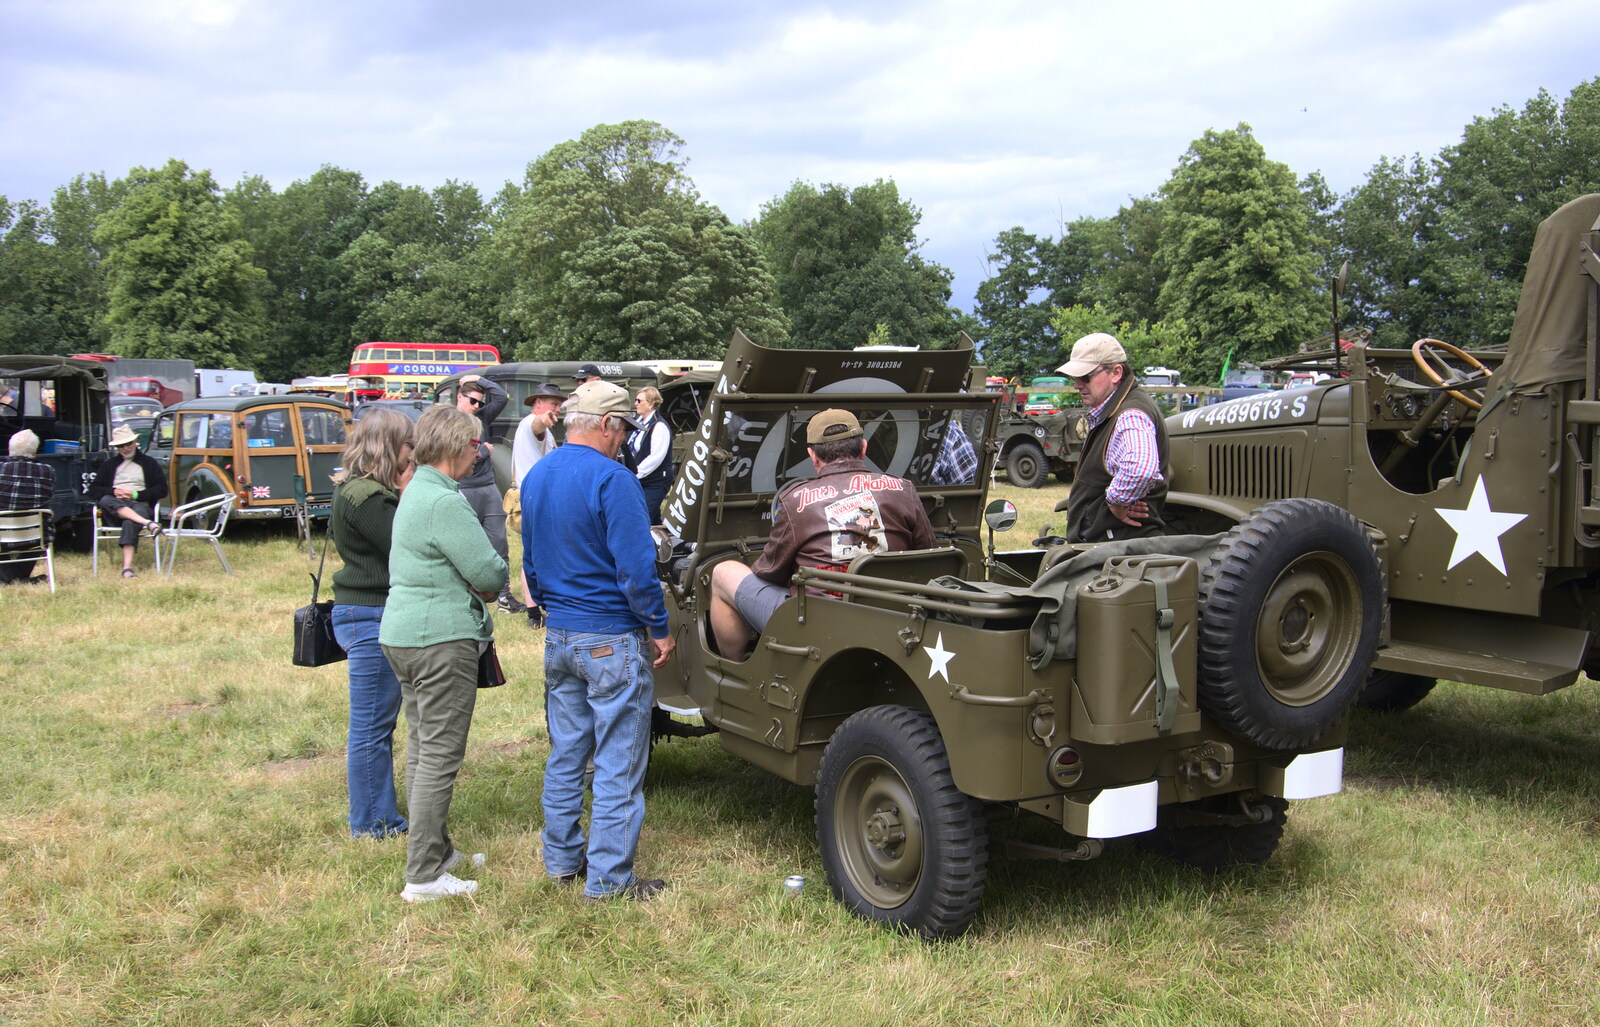 Clive in a Jeep from The Formerly-Known-As-The-Eye-Show, Palgrave, Suffolk - 17th June 2018